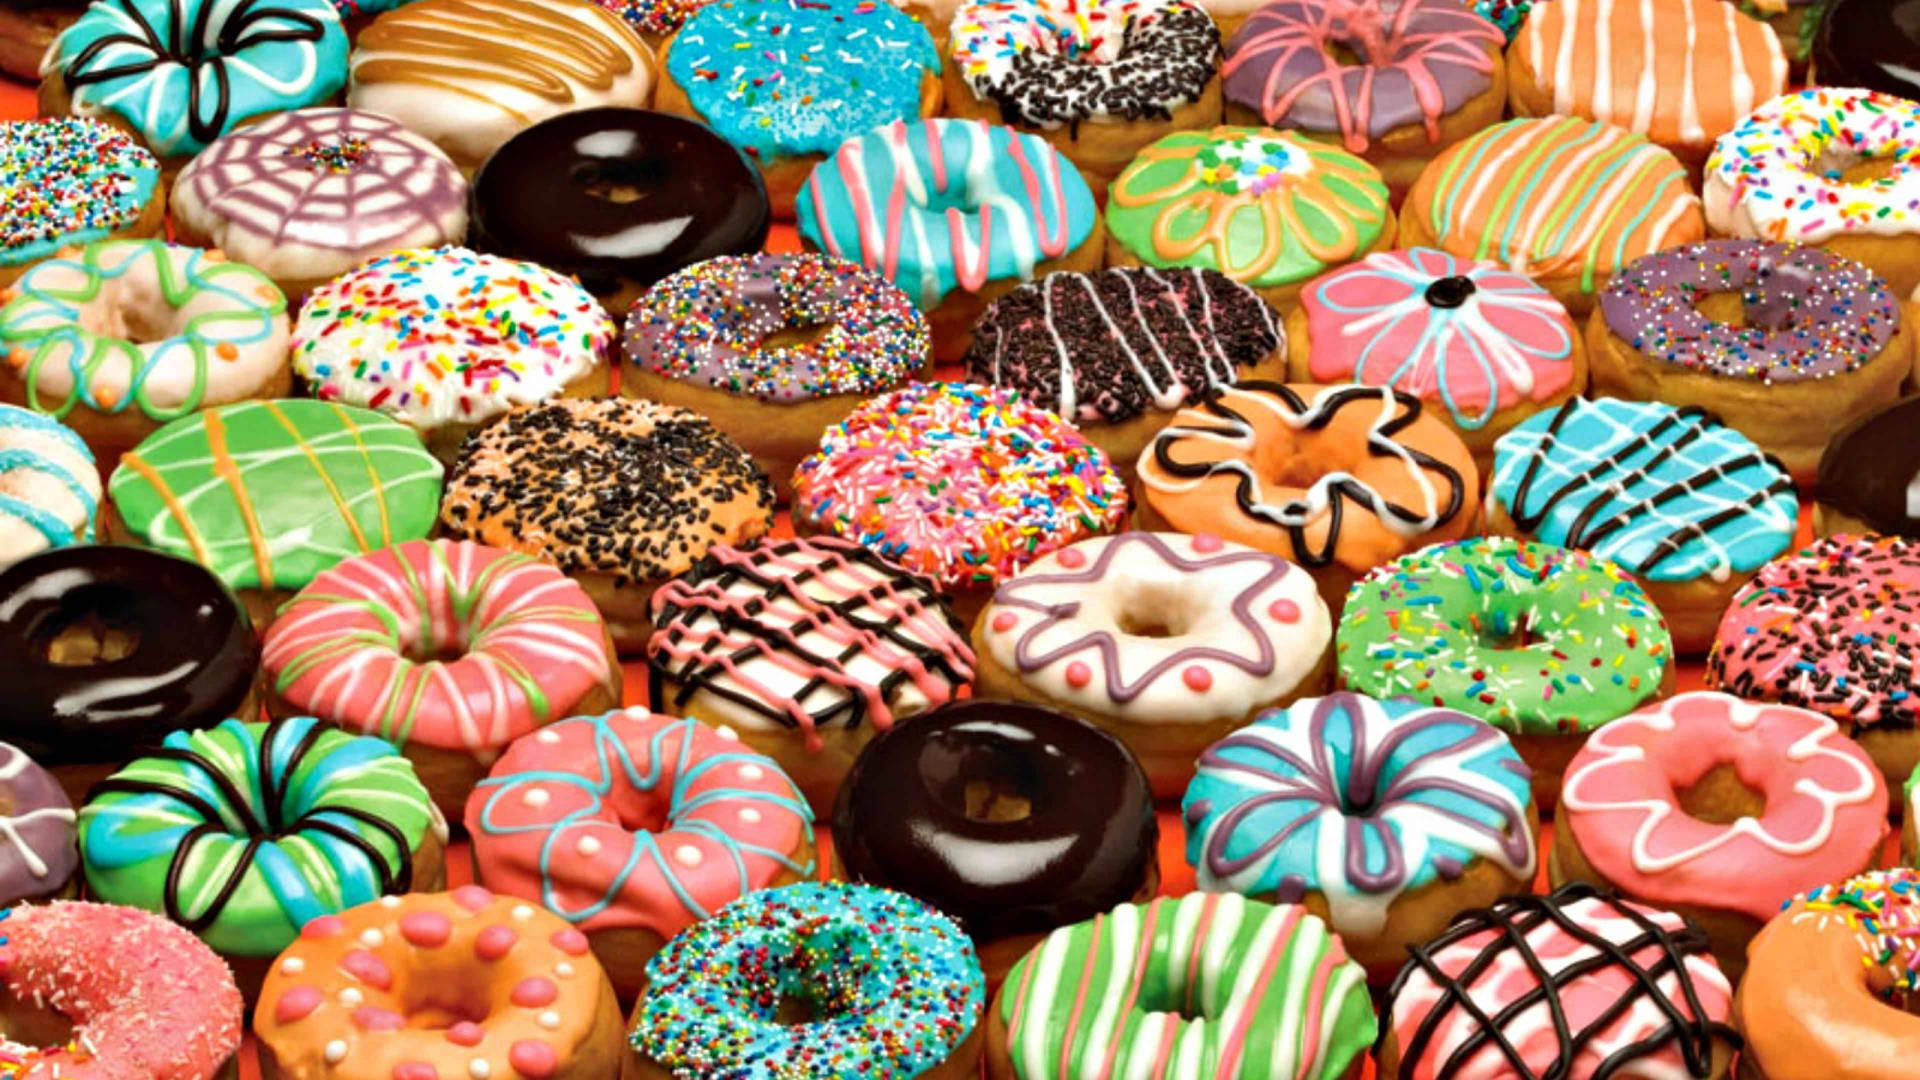 Colorful Donuts With Different Flavors Wallpaper